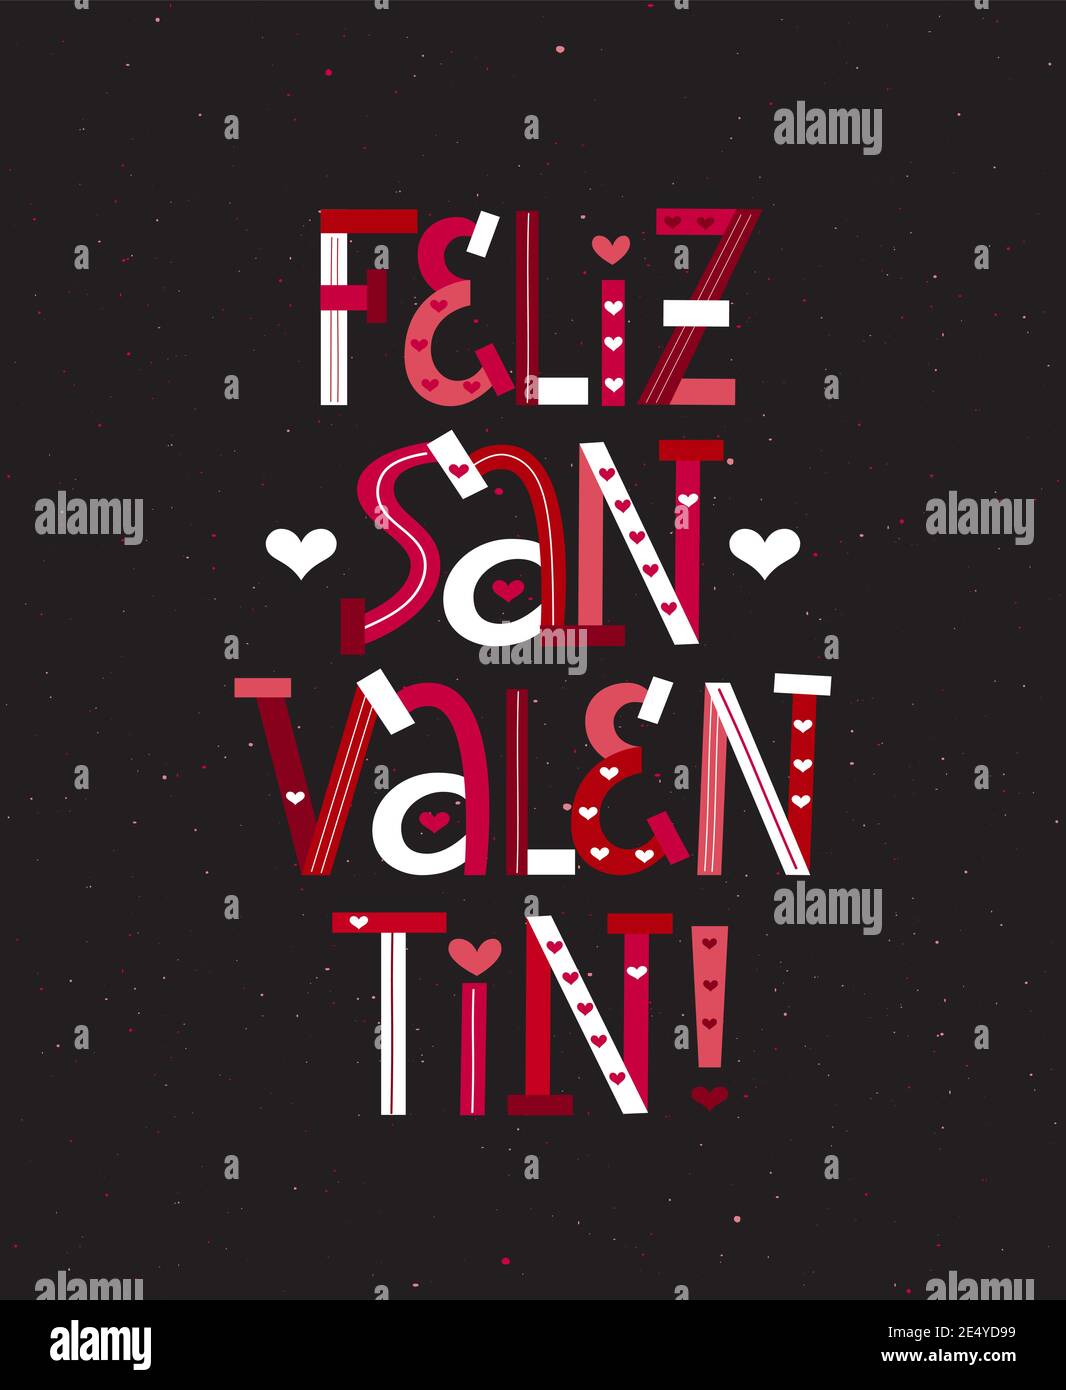 Feliz dia de San Valentin spanish lettering - Happy Valentines Day. Vector  text and symbols of love with rose paper heart for Valentine's Day banner  Stock Vector Image & Art - Alamy